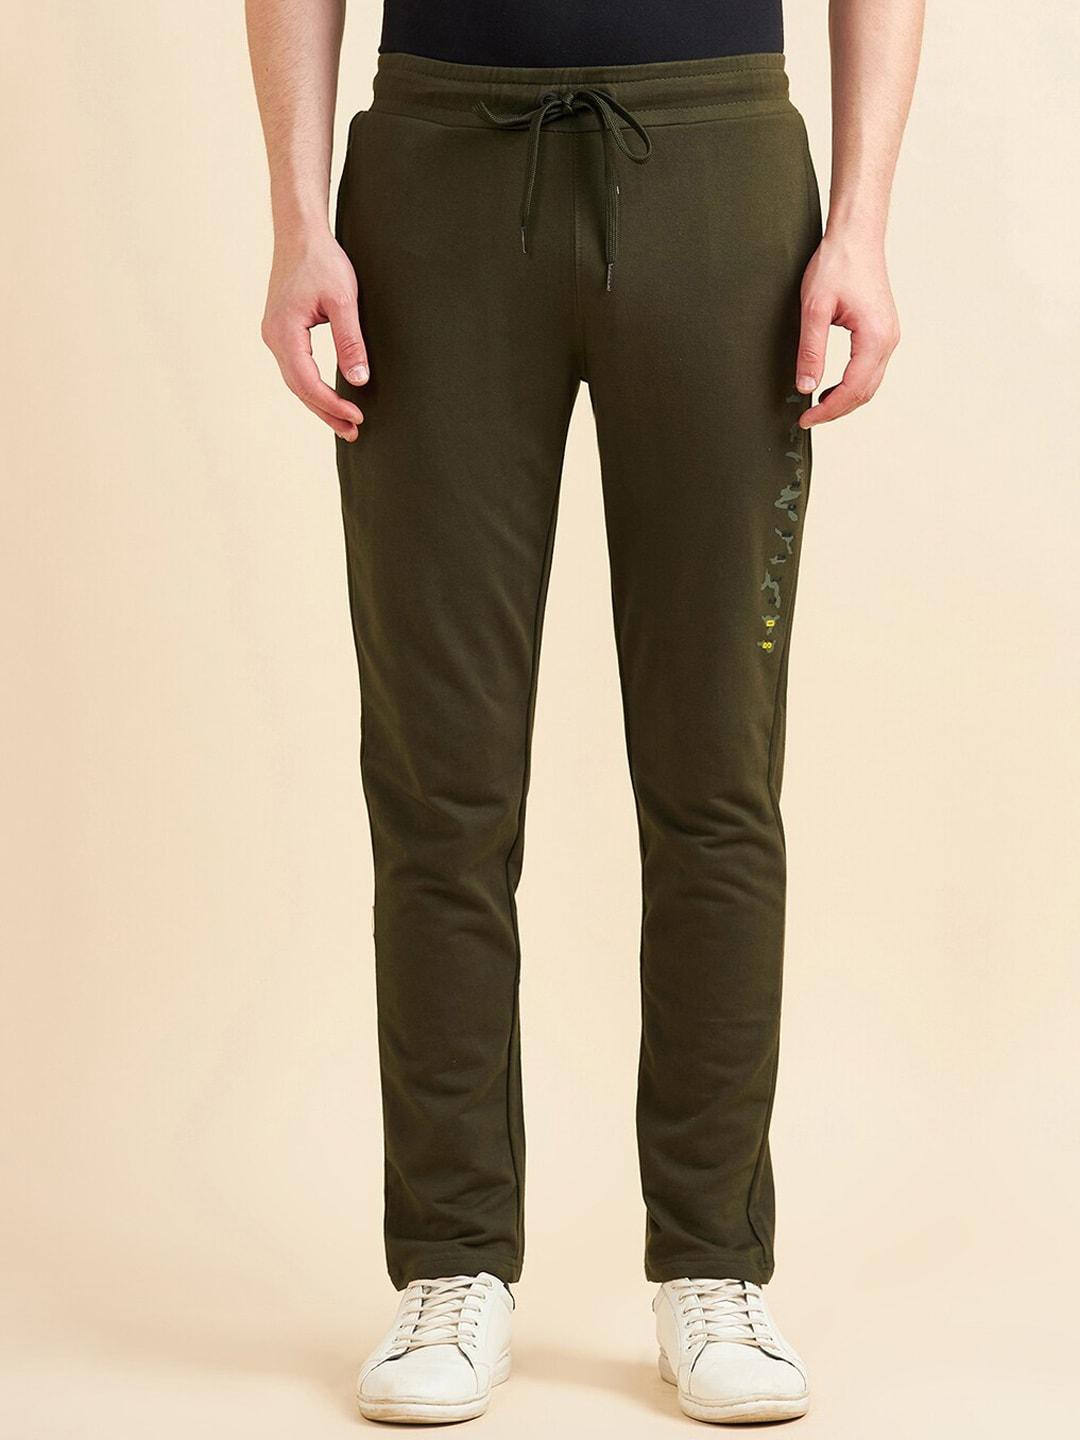 sweet-dreams-men-olive-green-mid-rise-4-way-stretch-track-pants